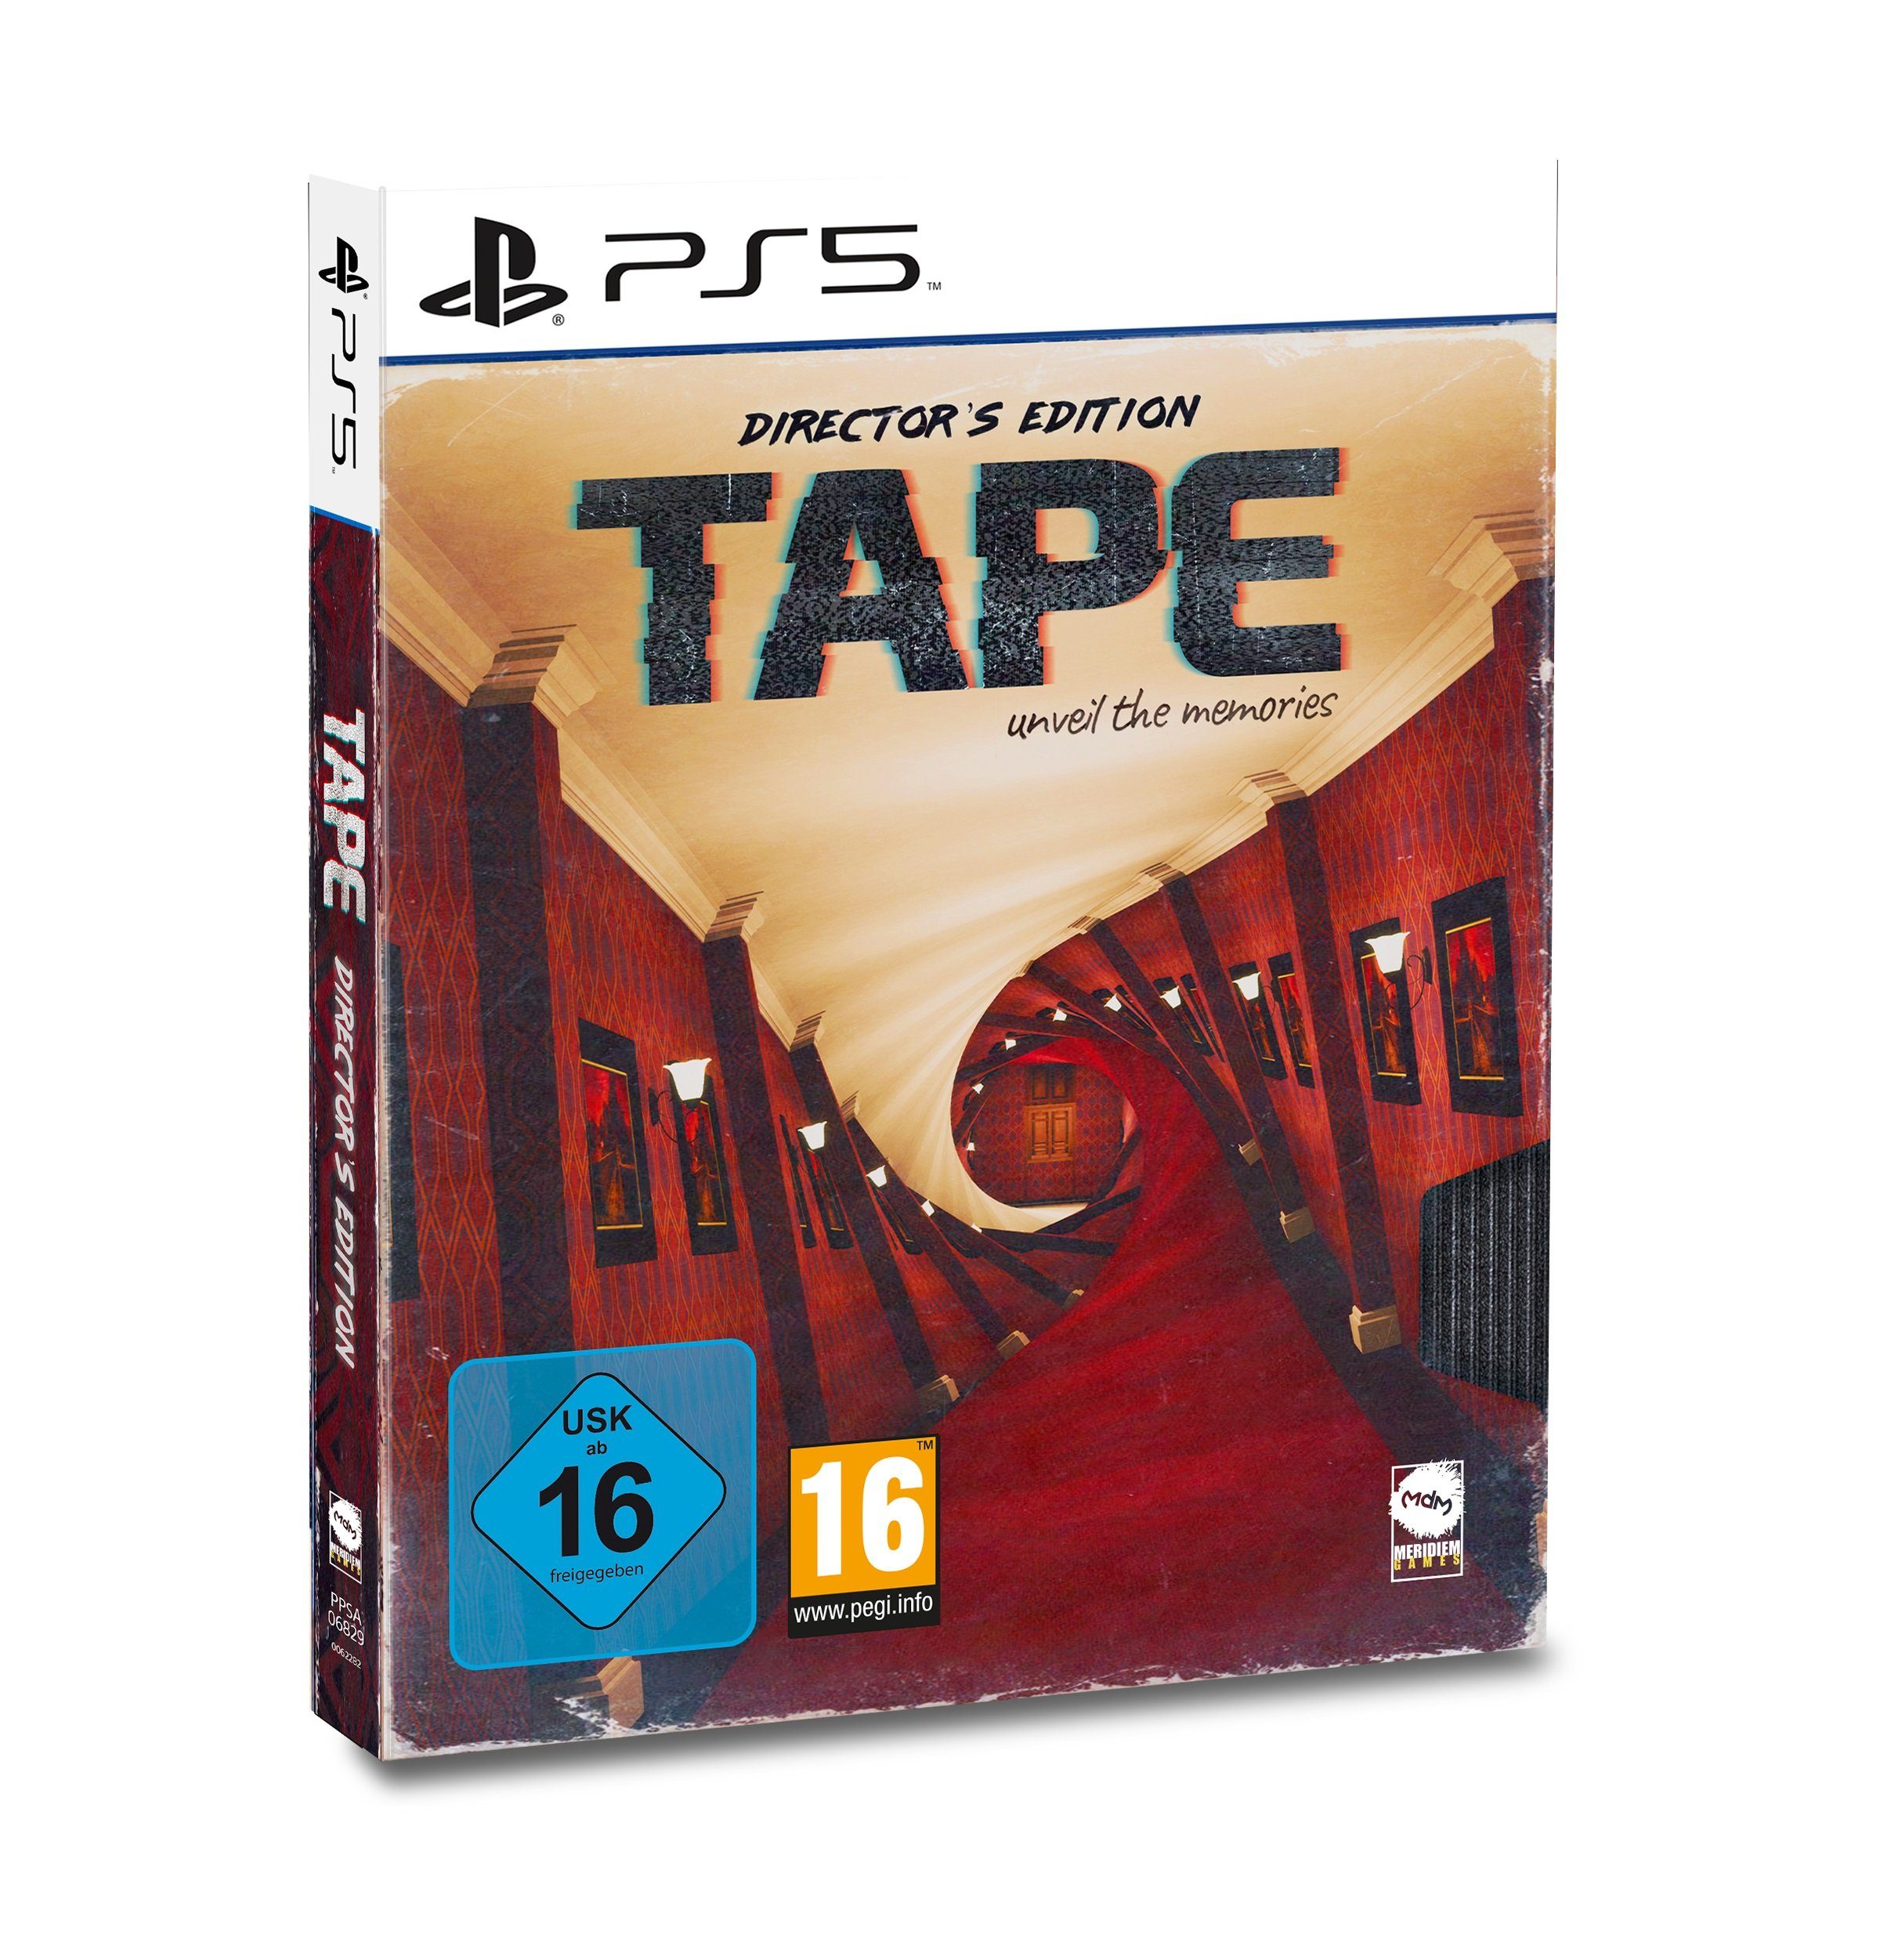 PlayStation TAPE: Memories Edition the 5 Unveil Directors